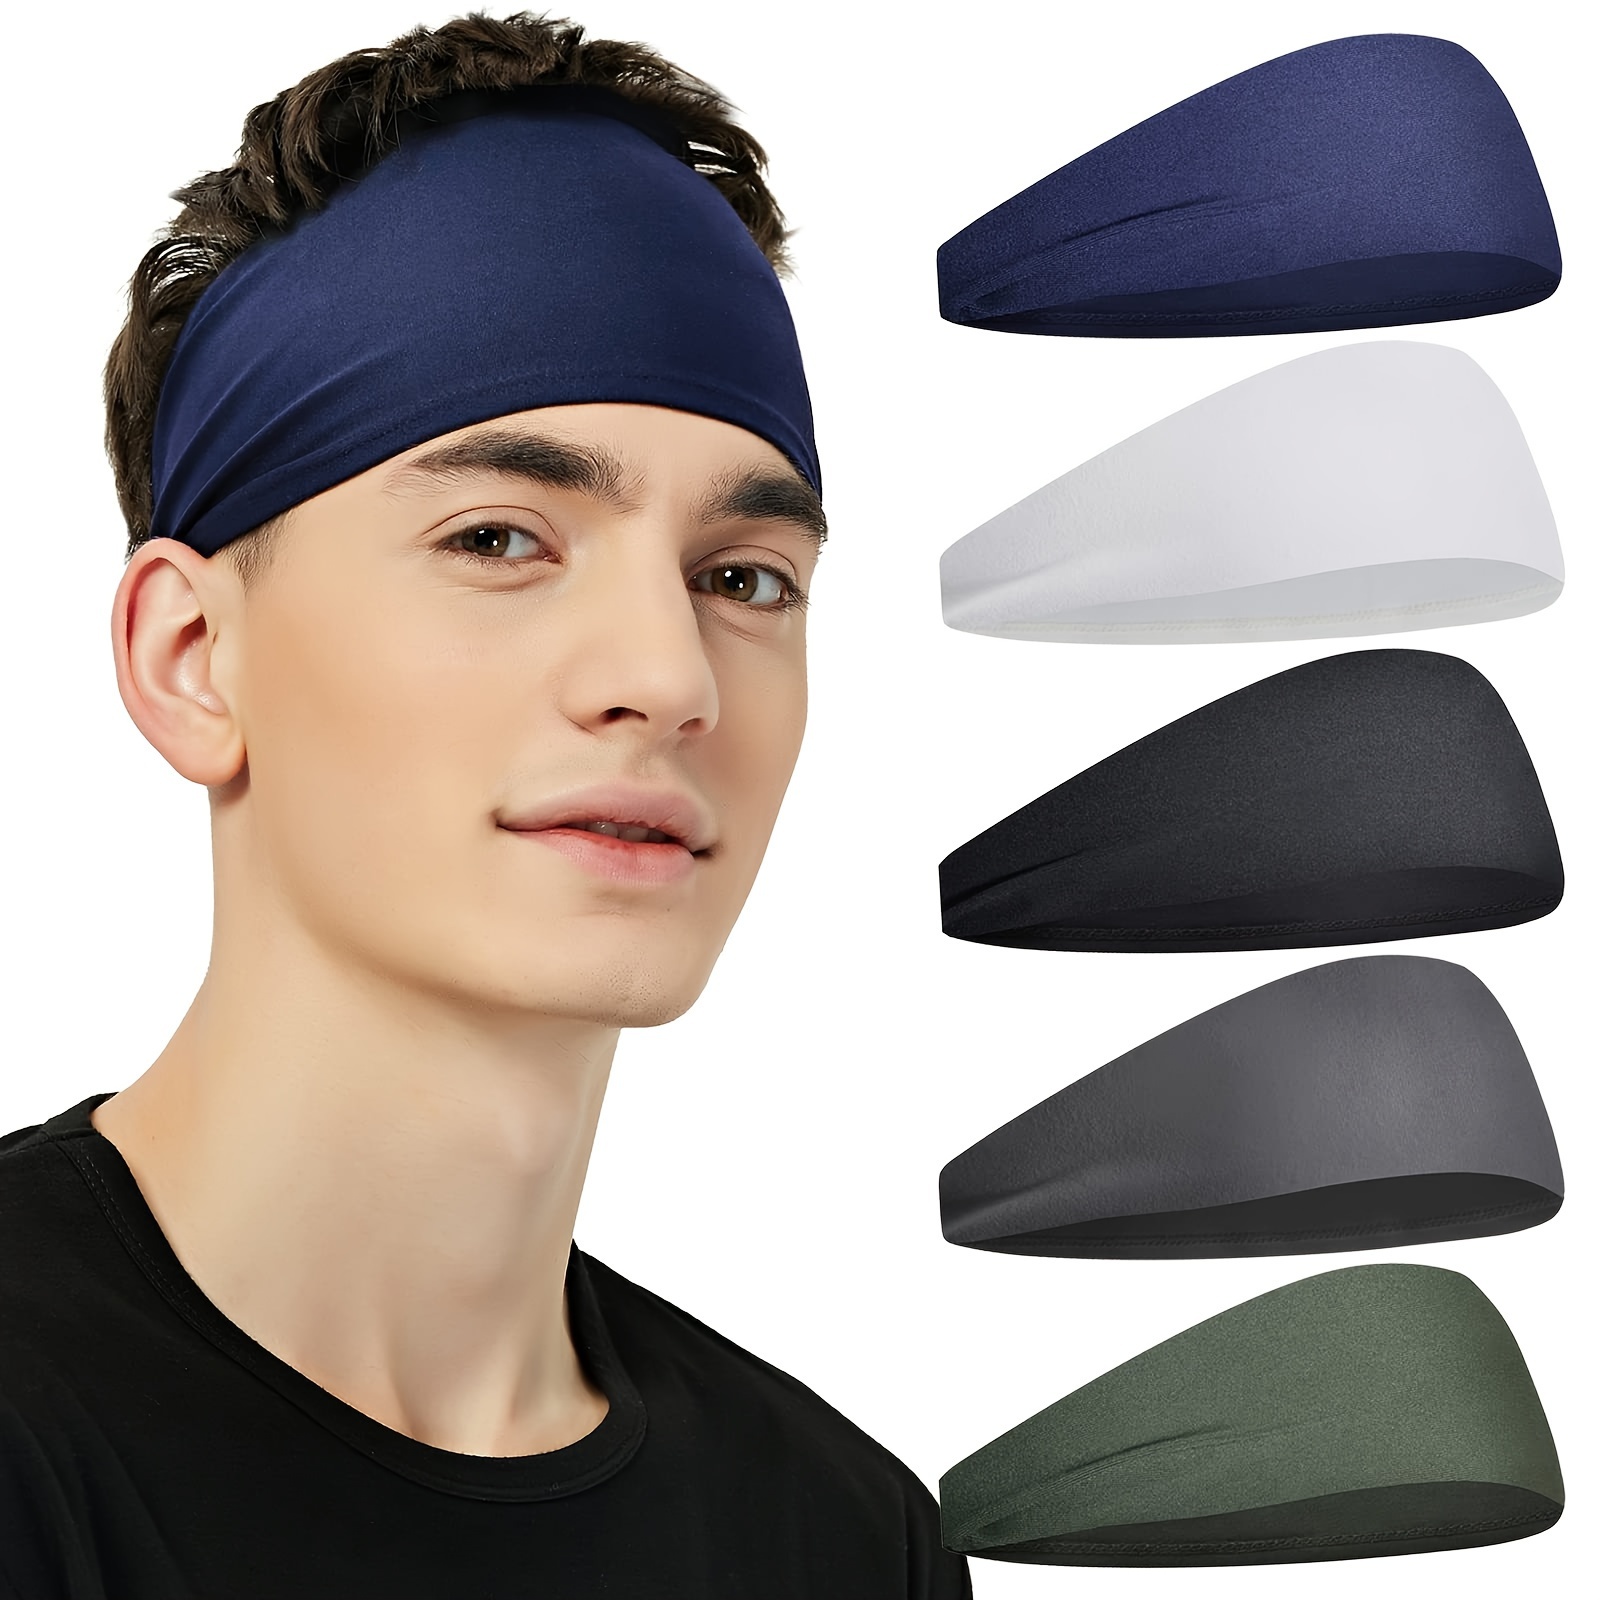 Facial Hair Band - Facial Hairband Latest Price, Manufacturers & Suppliers